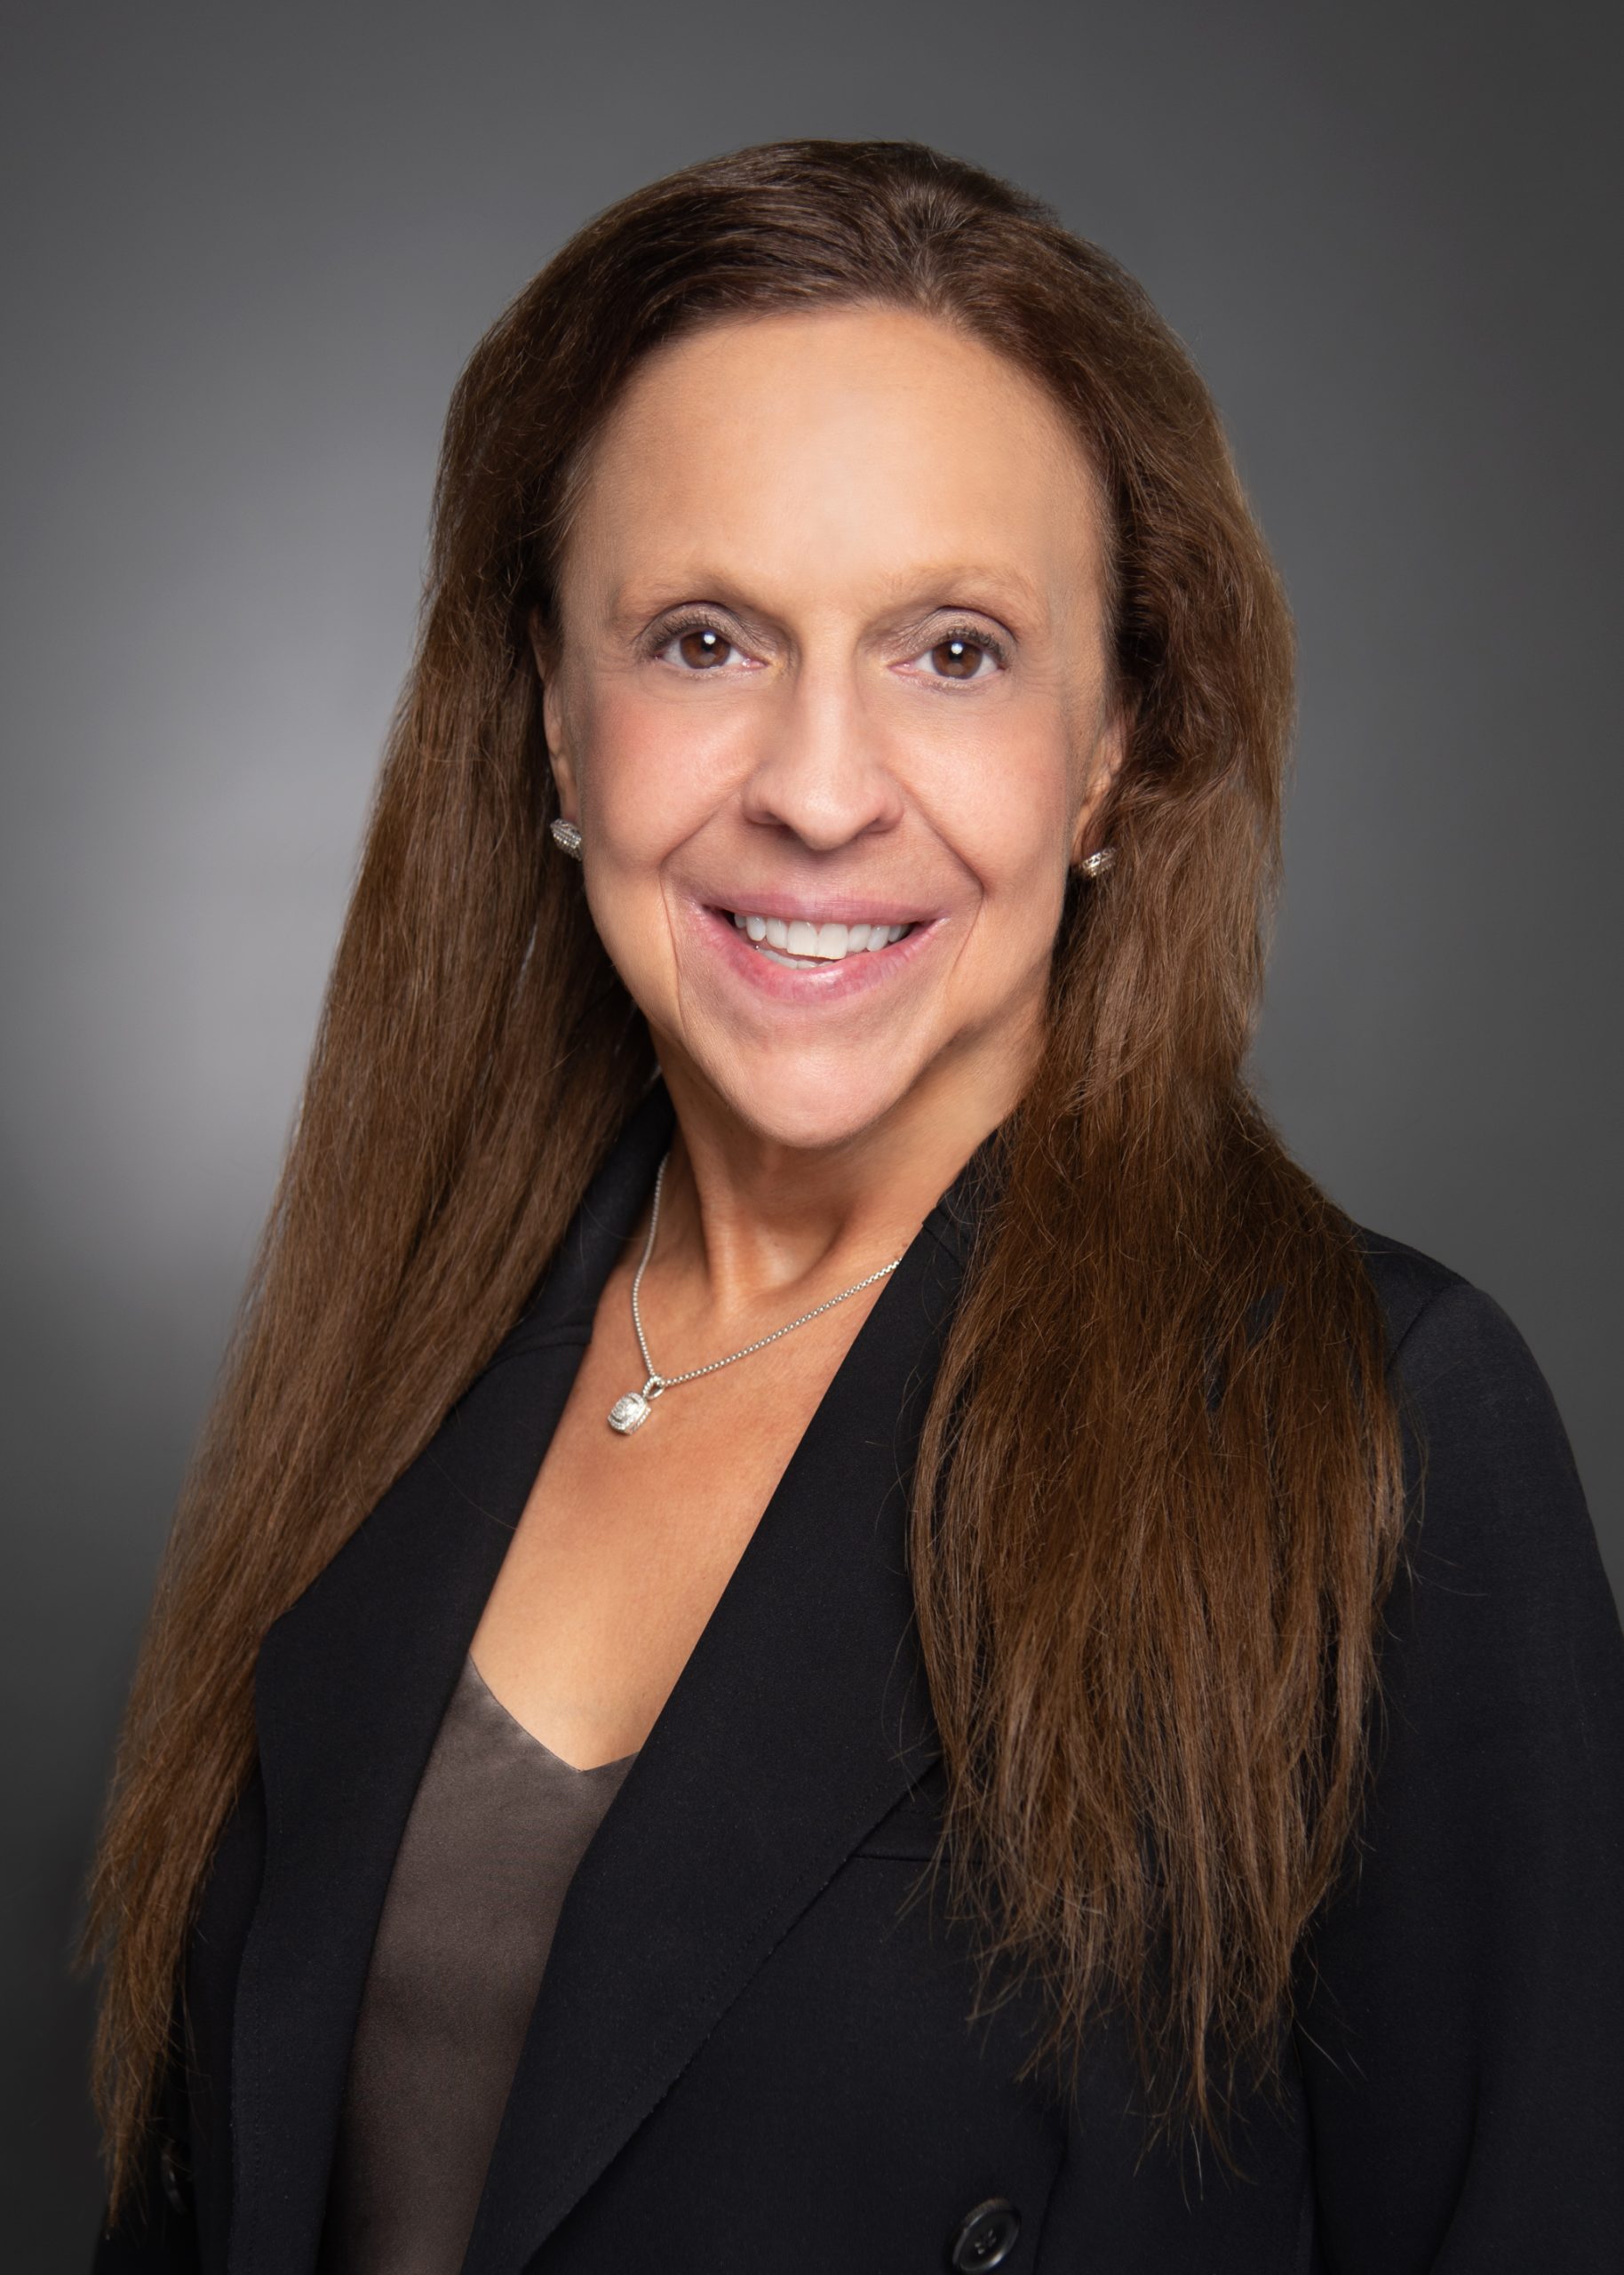 professional headshot of Susan Hopkins, CPA wearing a pearl necklace and blazer